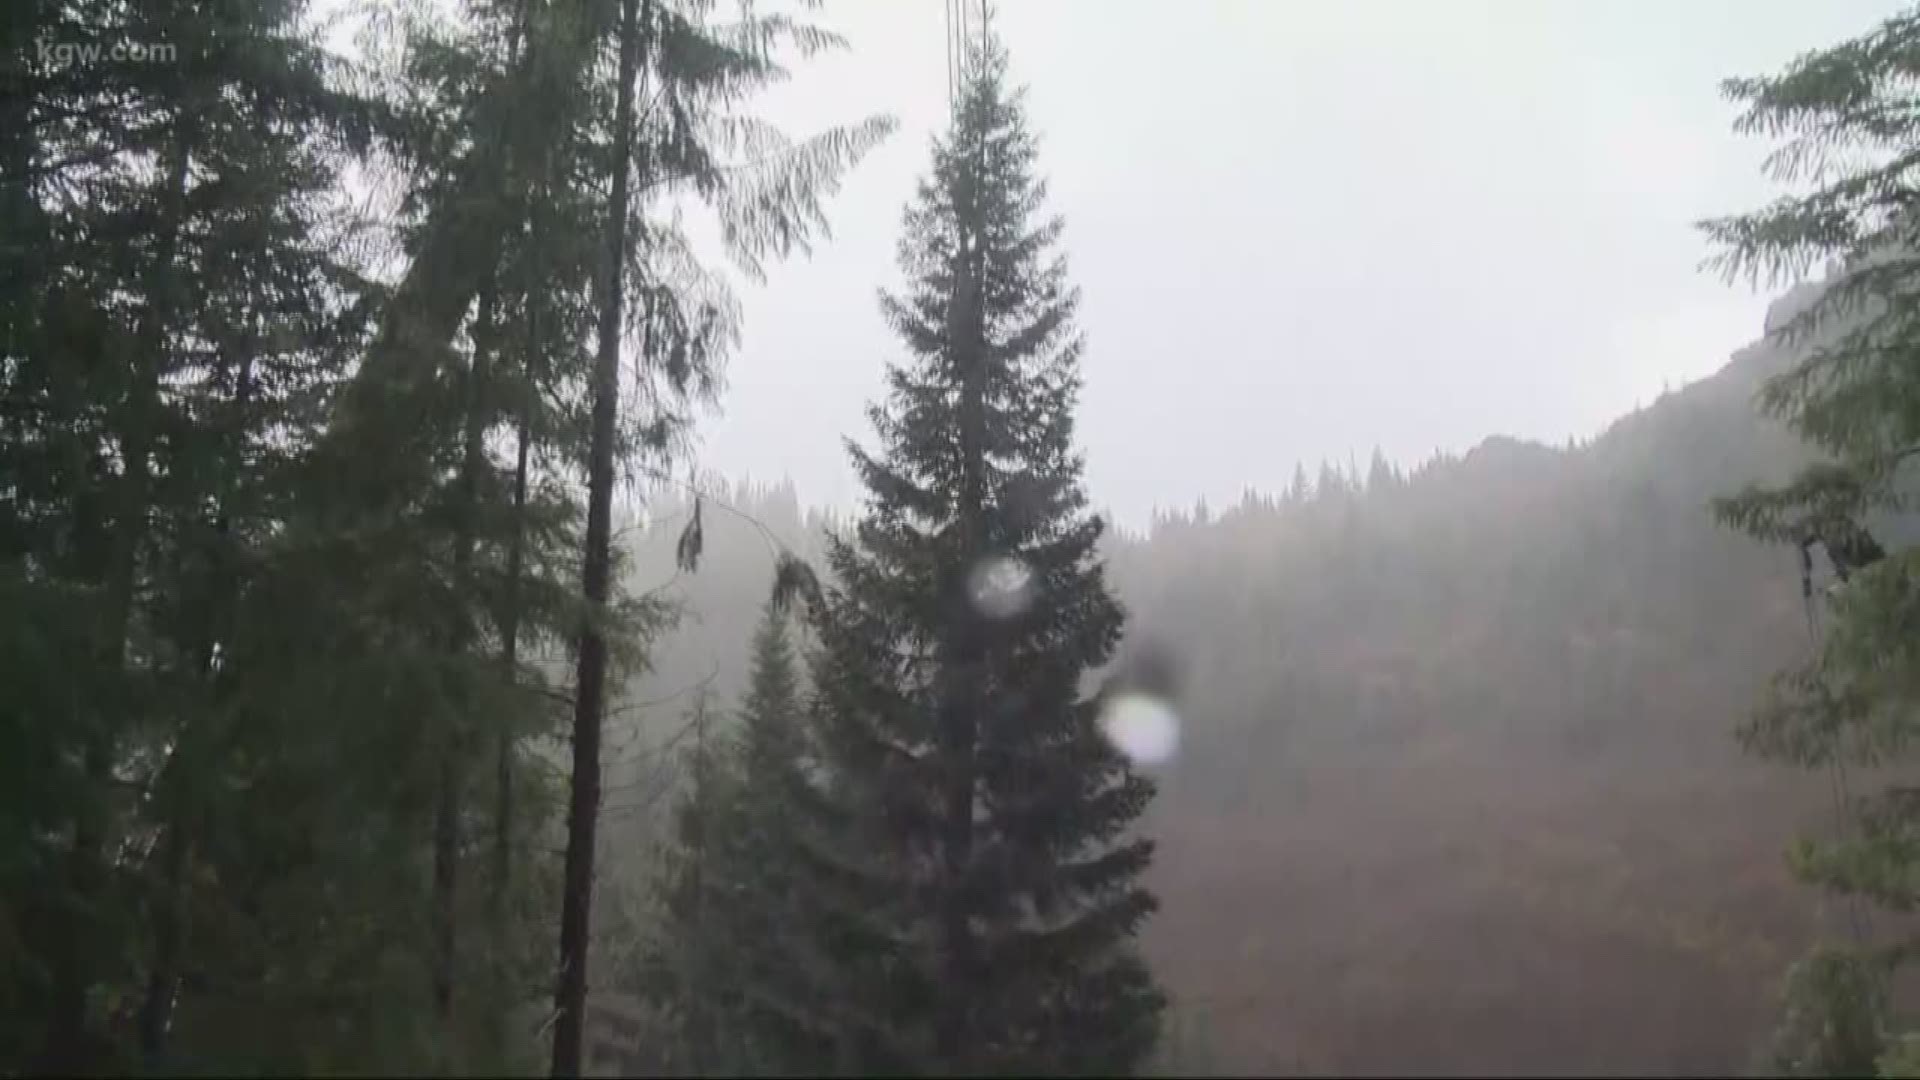 The Capitol Christmas tree was cut down in an Oregon forest.